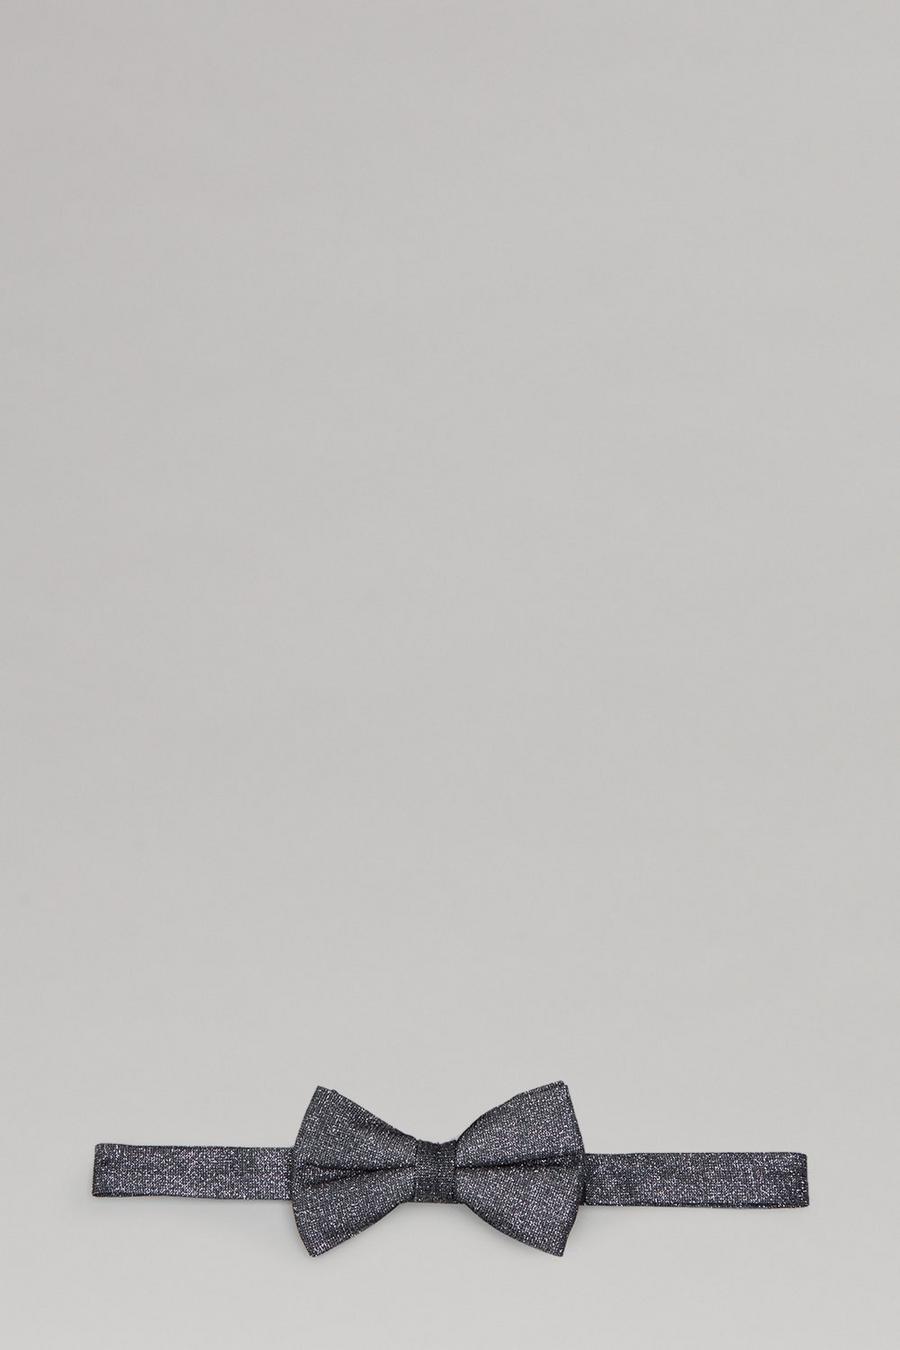 Black And Silver Glitter Bow Tie